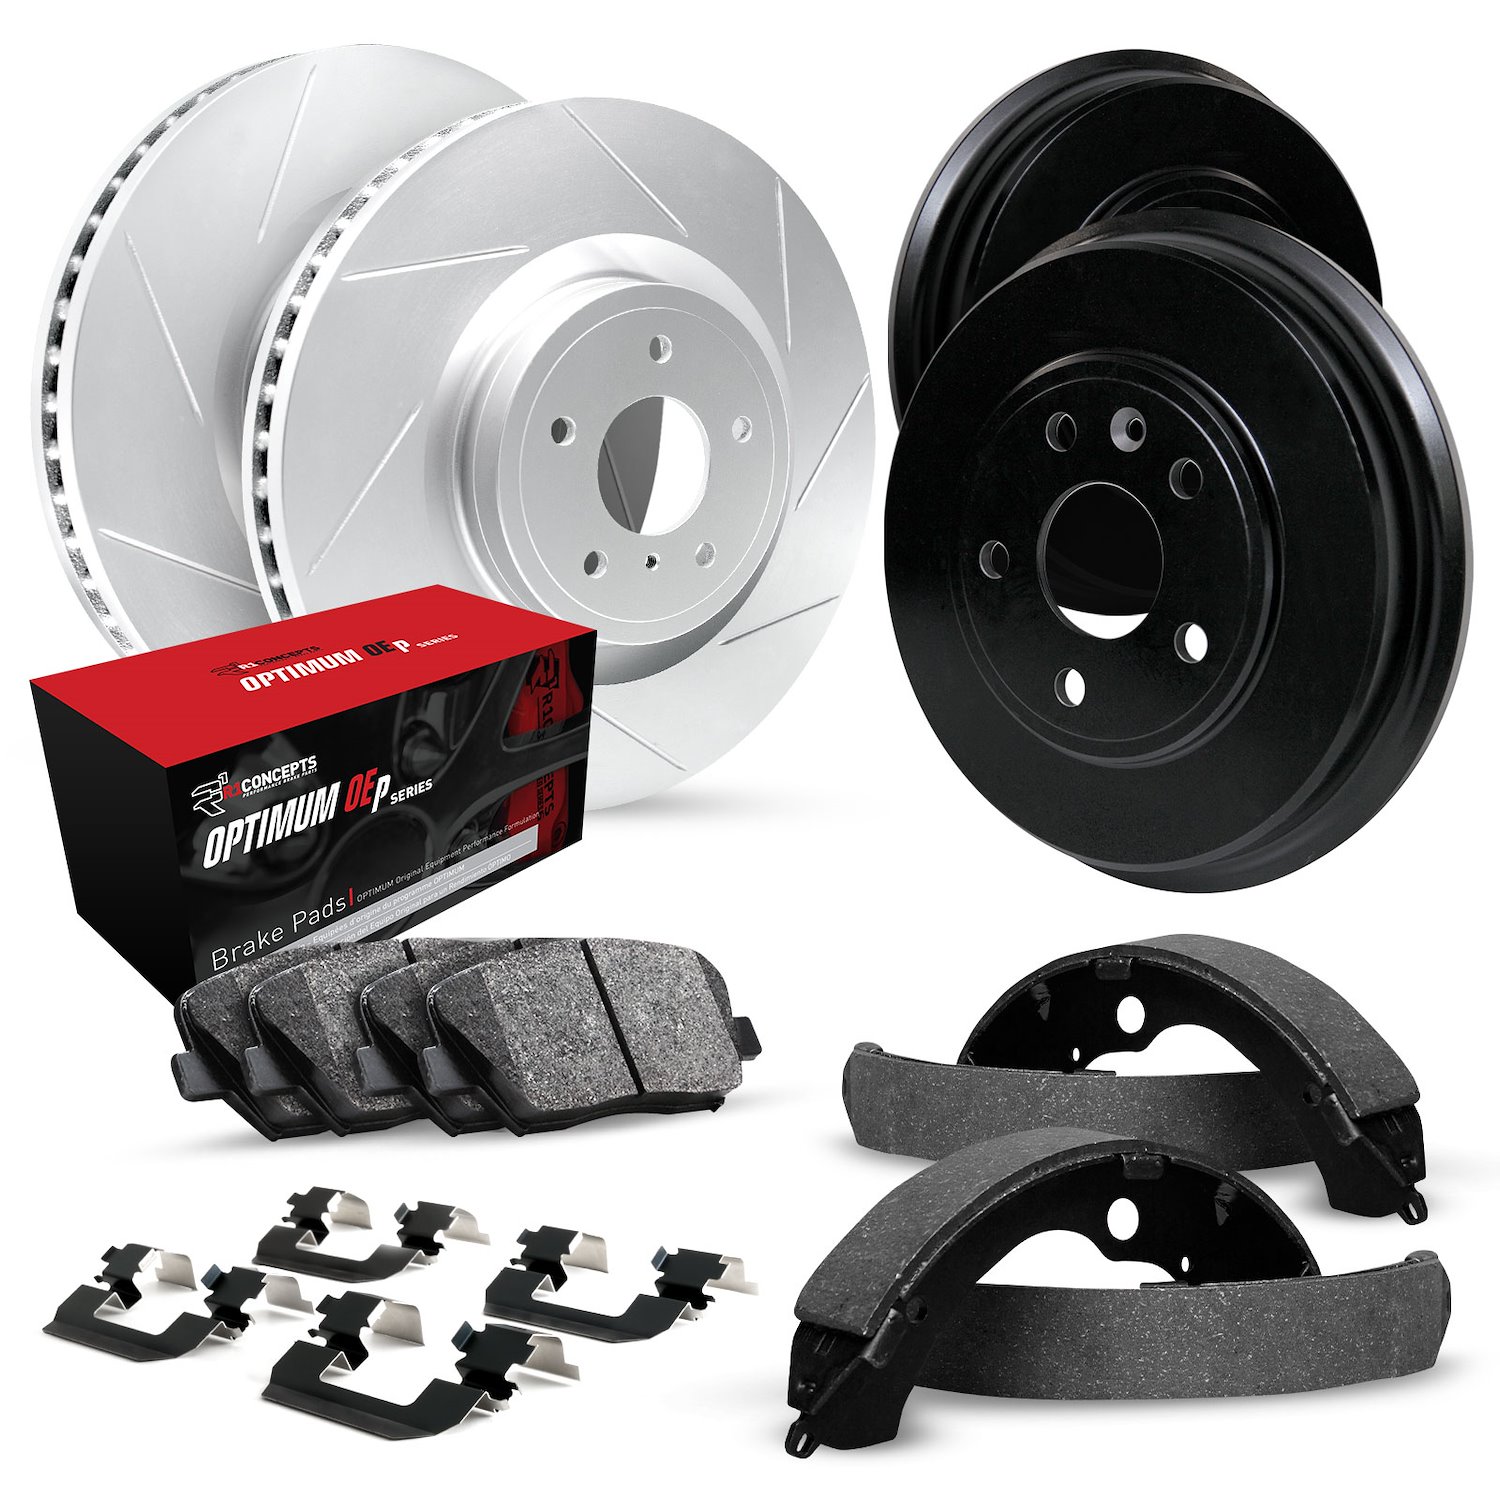 GEO-Carbon Slotted Brake Rotor & Drum Set w/Optimum OE Pads, Shoes, & Hardware, 1990-2002 GM, Position: Front & Rear